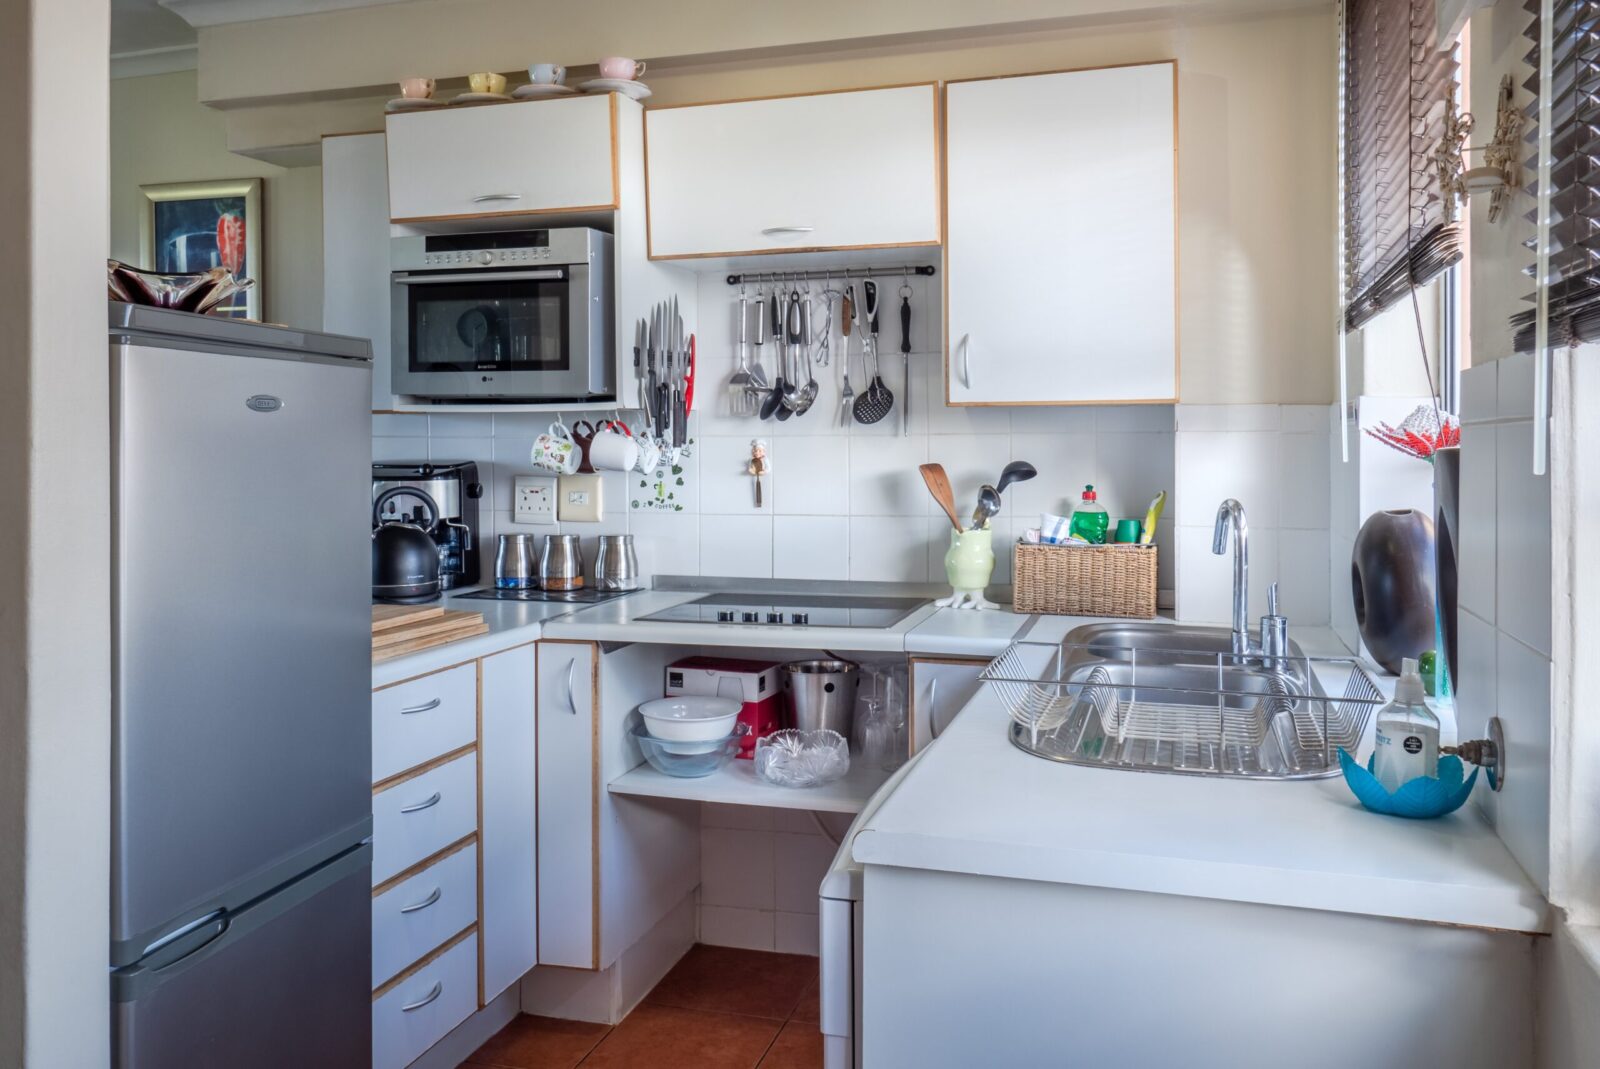 Where to Put a Microwave in a Small Kitchen?